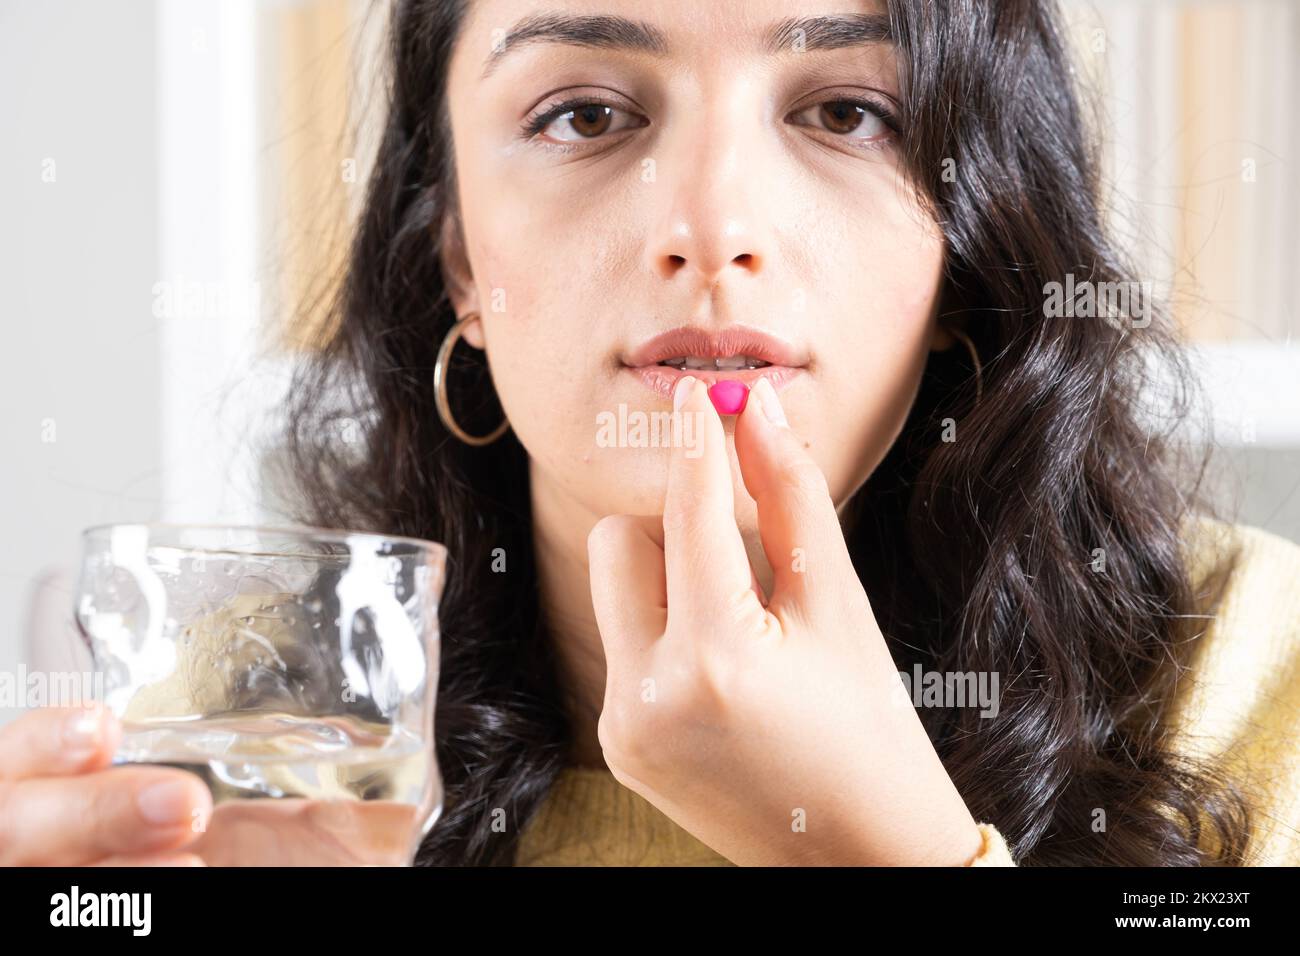 Taking pill, close up front view of woman taking pill. Holding antibiotic or antidepressant or vitamin or contraceptive medicine tablet. Stock Photo